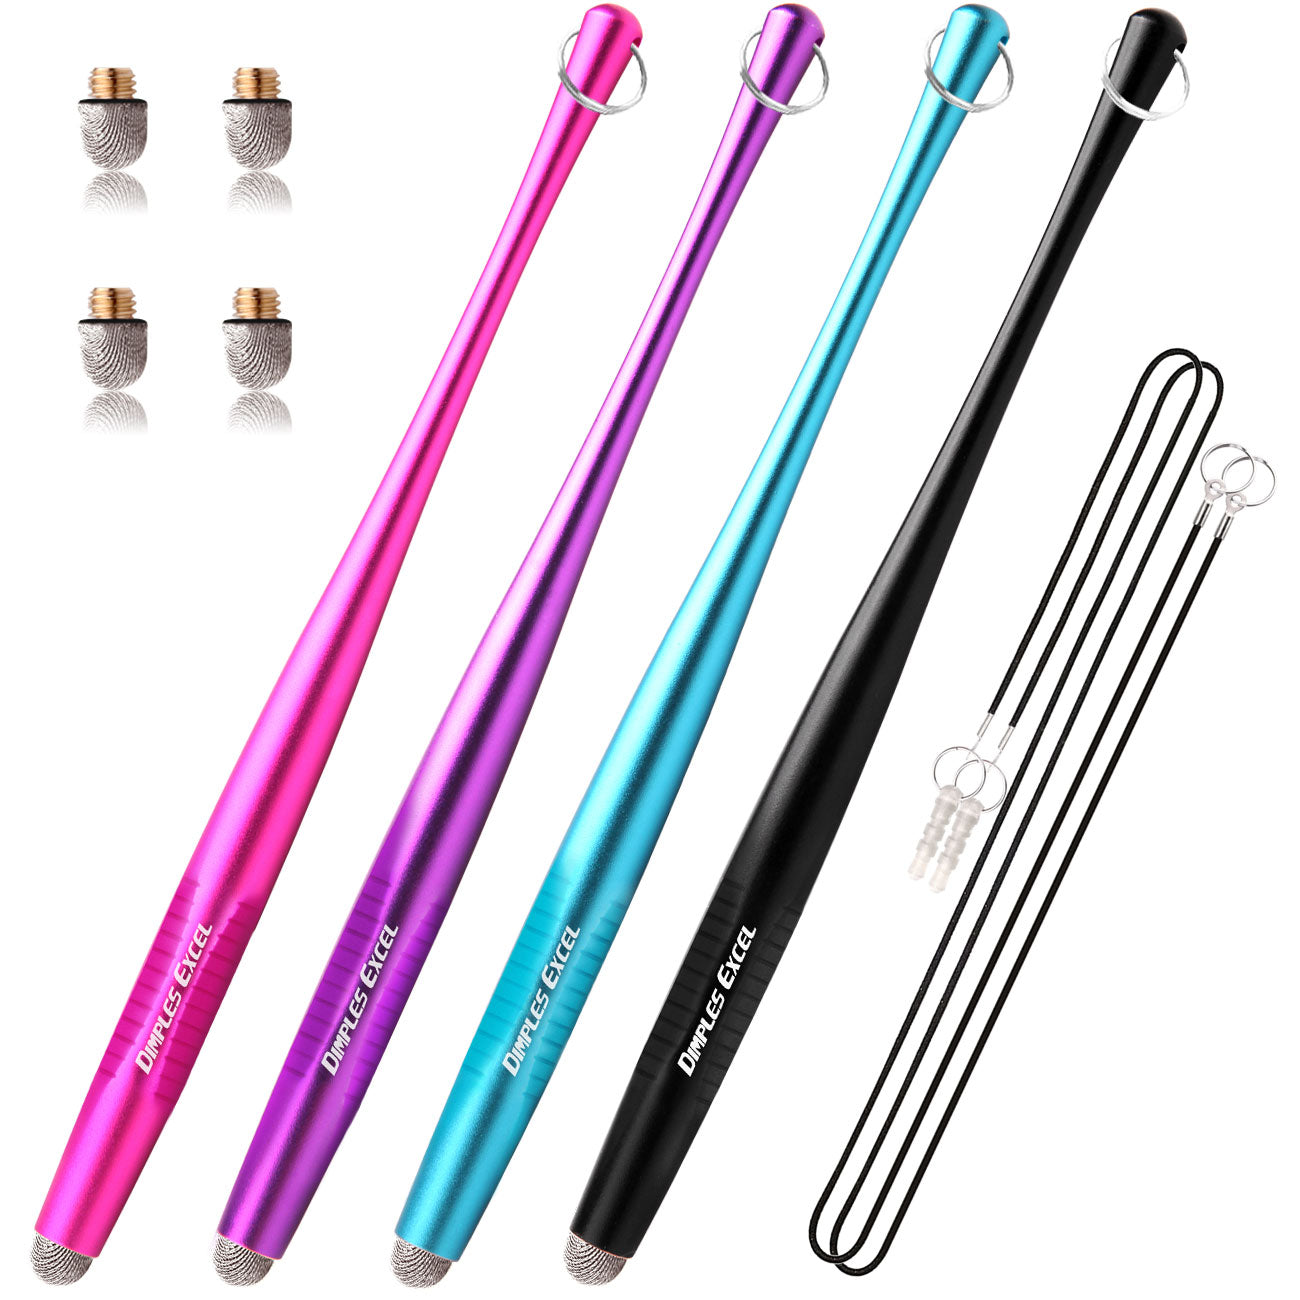 Slim Waist Ergonomically Designed Stylus Pen Compatible for Iphone iPad Android Phone Touch Screens Drawing